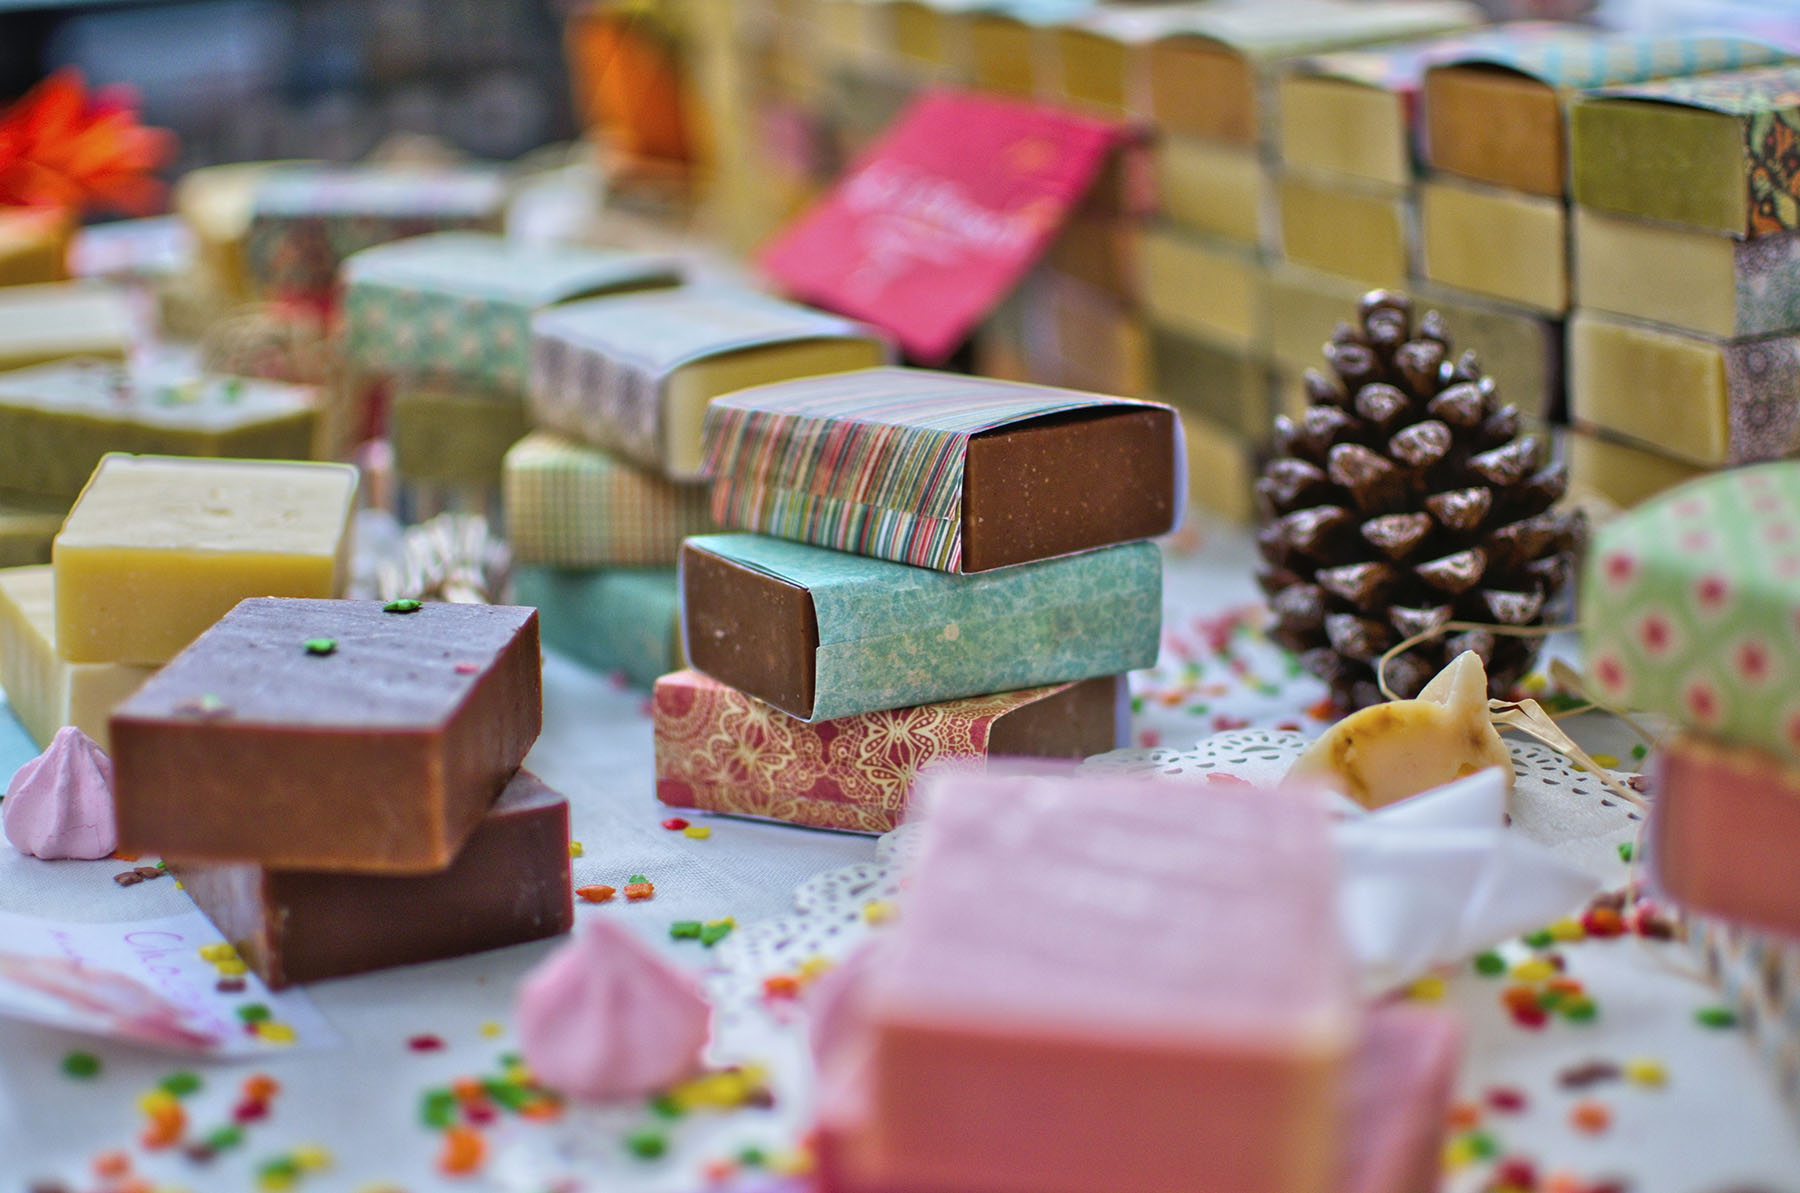 Photo of handmade soaps in multiple colors (CC license)